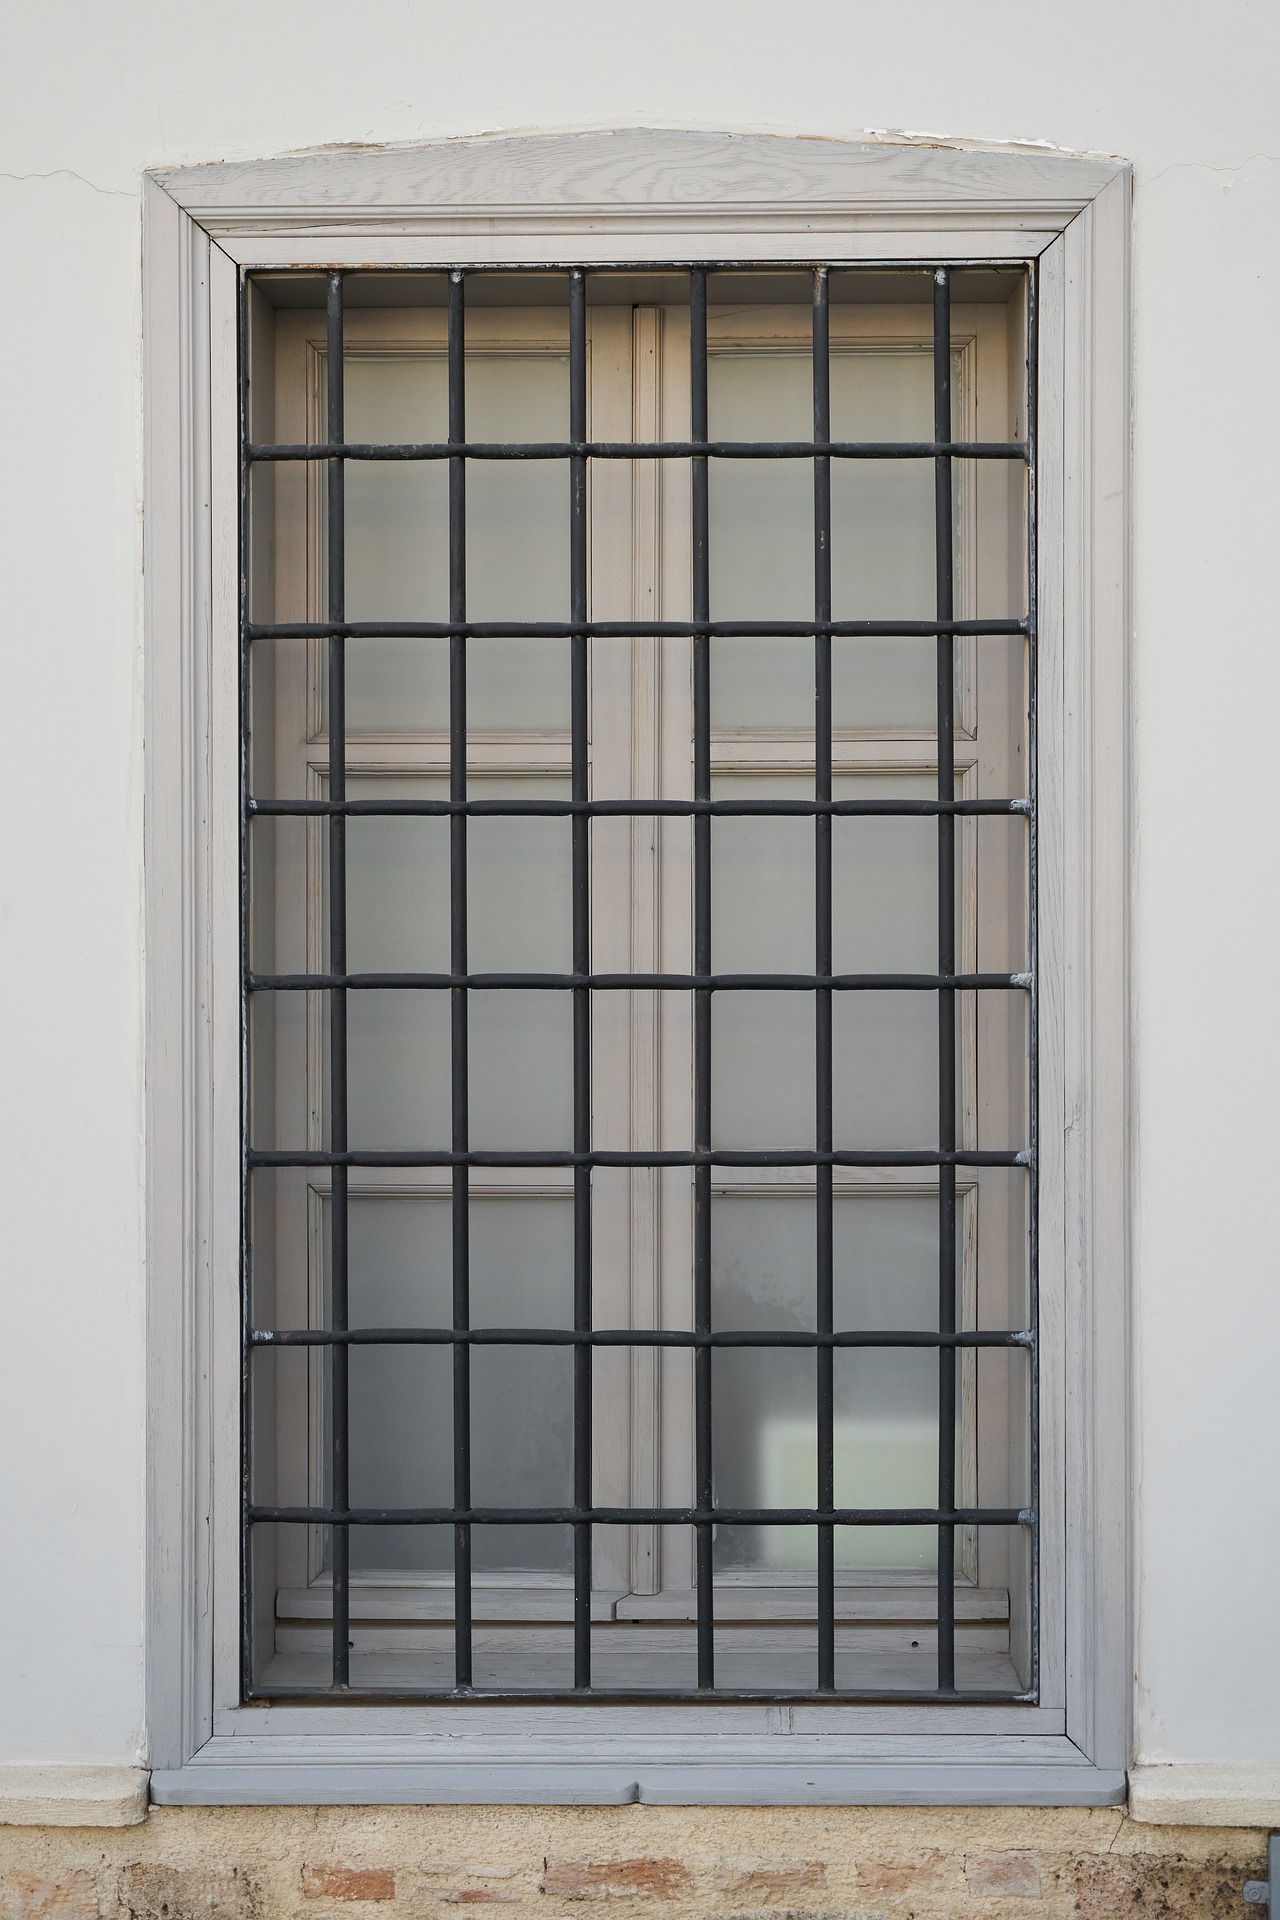 Security bars protecting a window